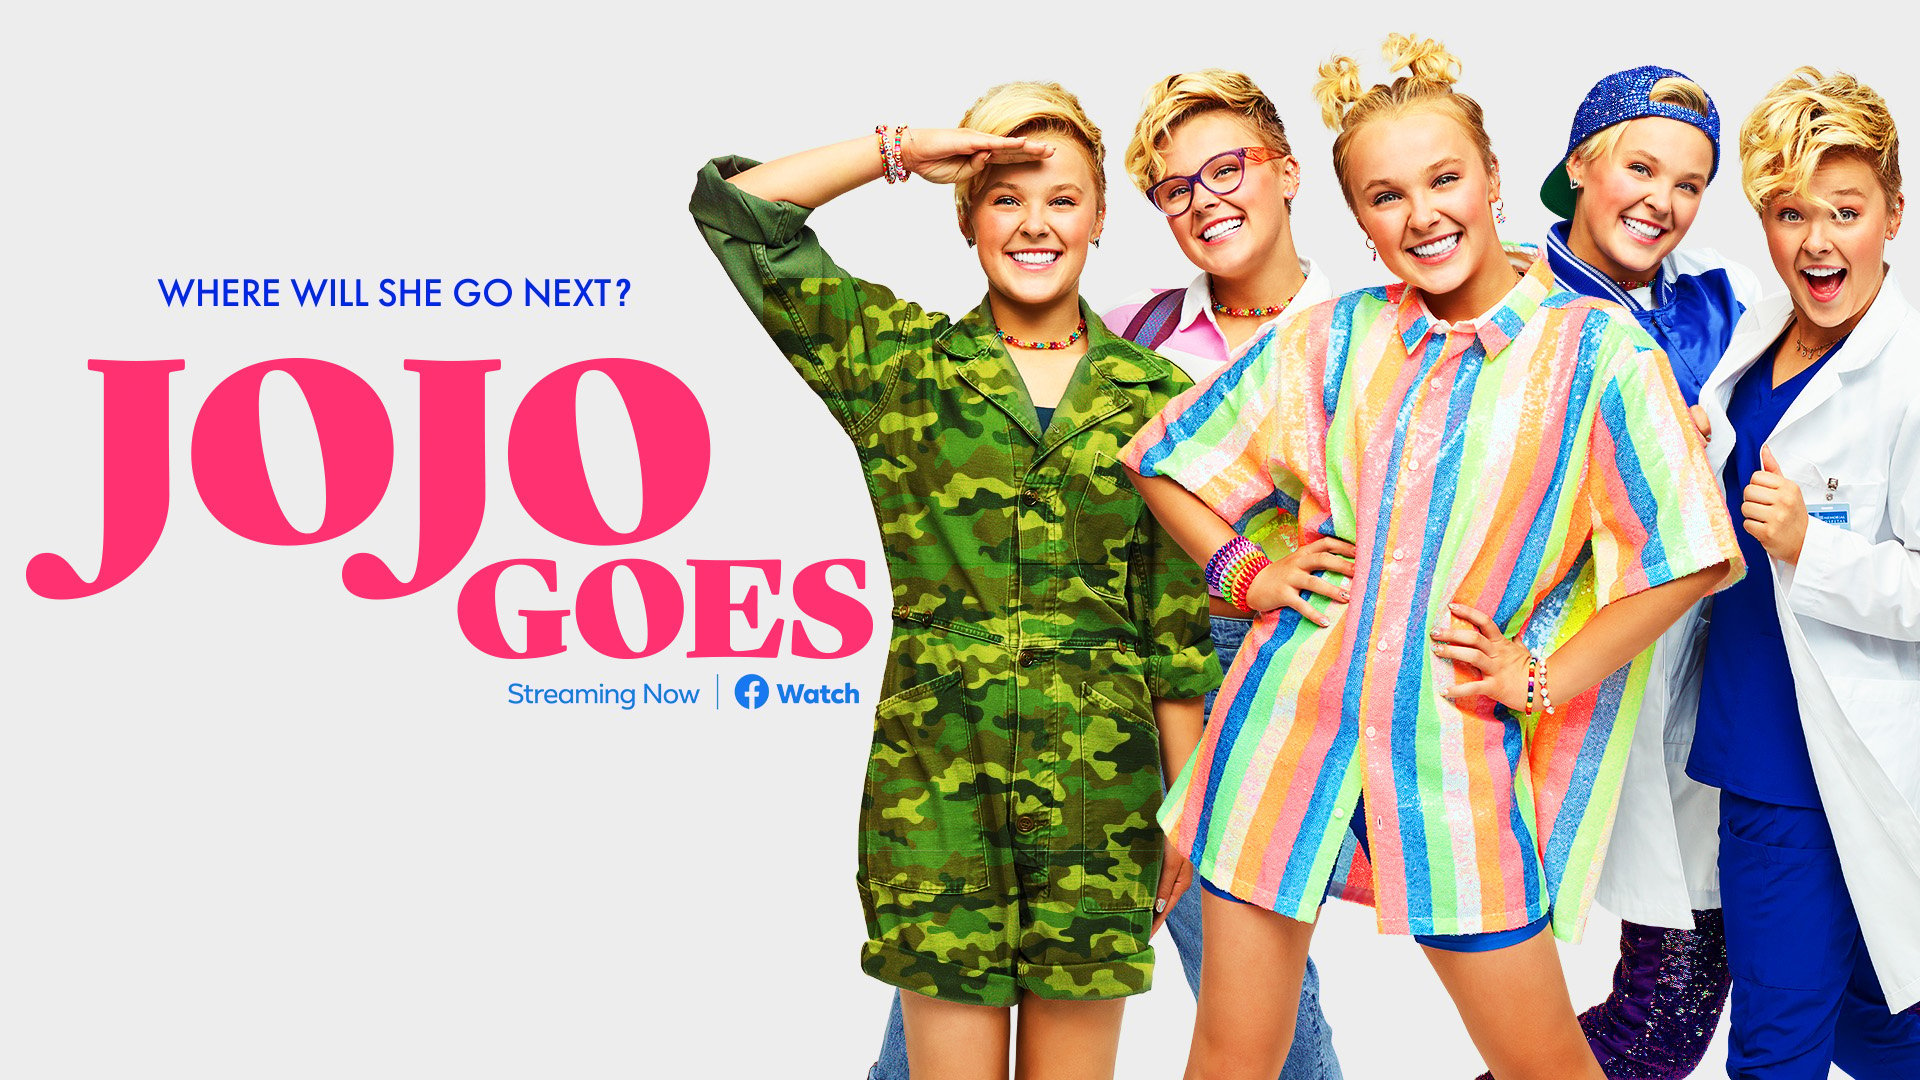 JoJo Siwa wears different costumes and outfits in the 'JoJo Goes' keyart photo